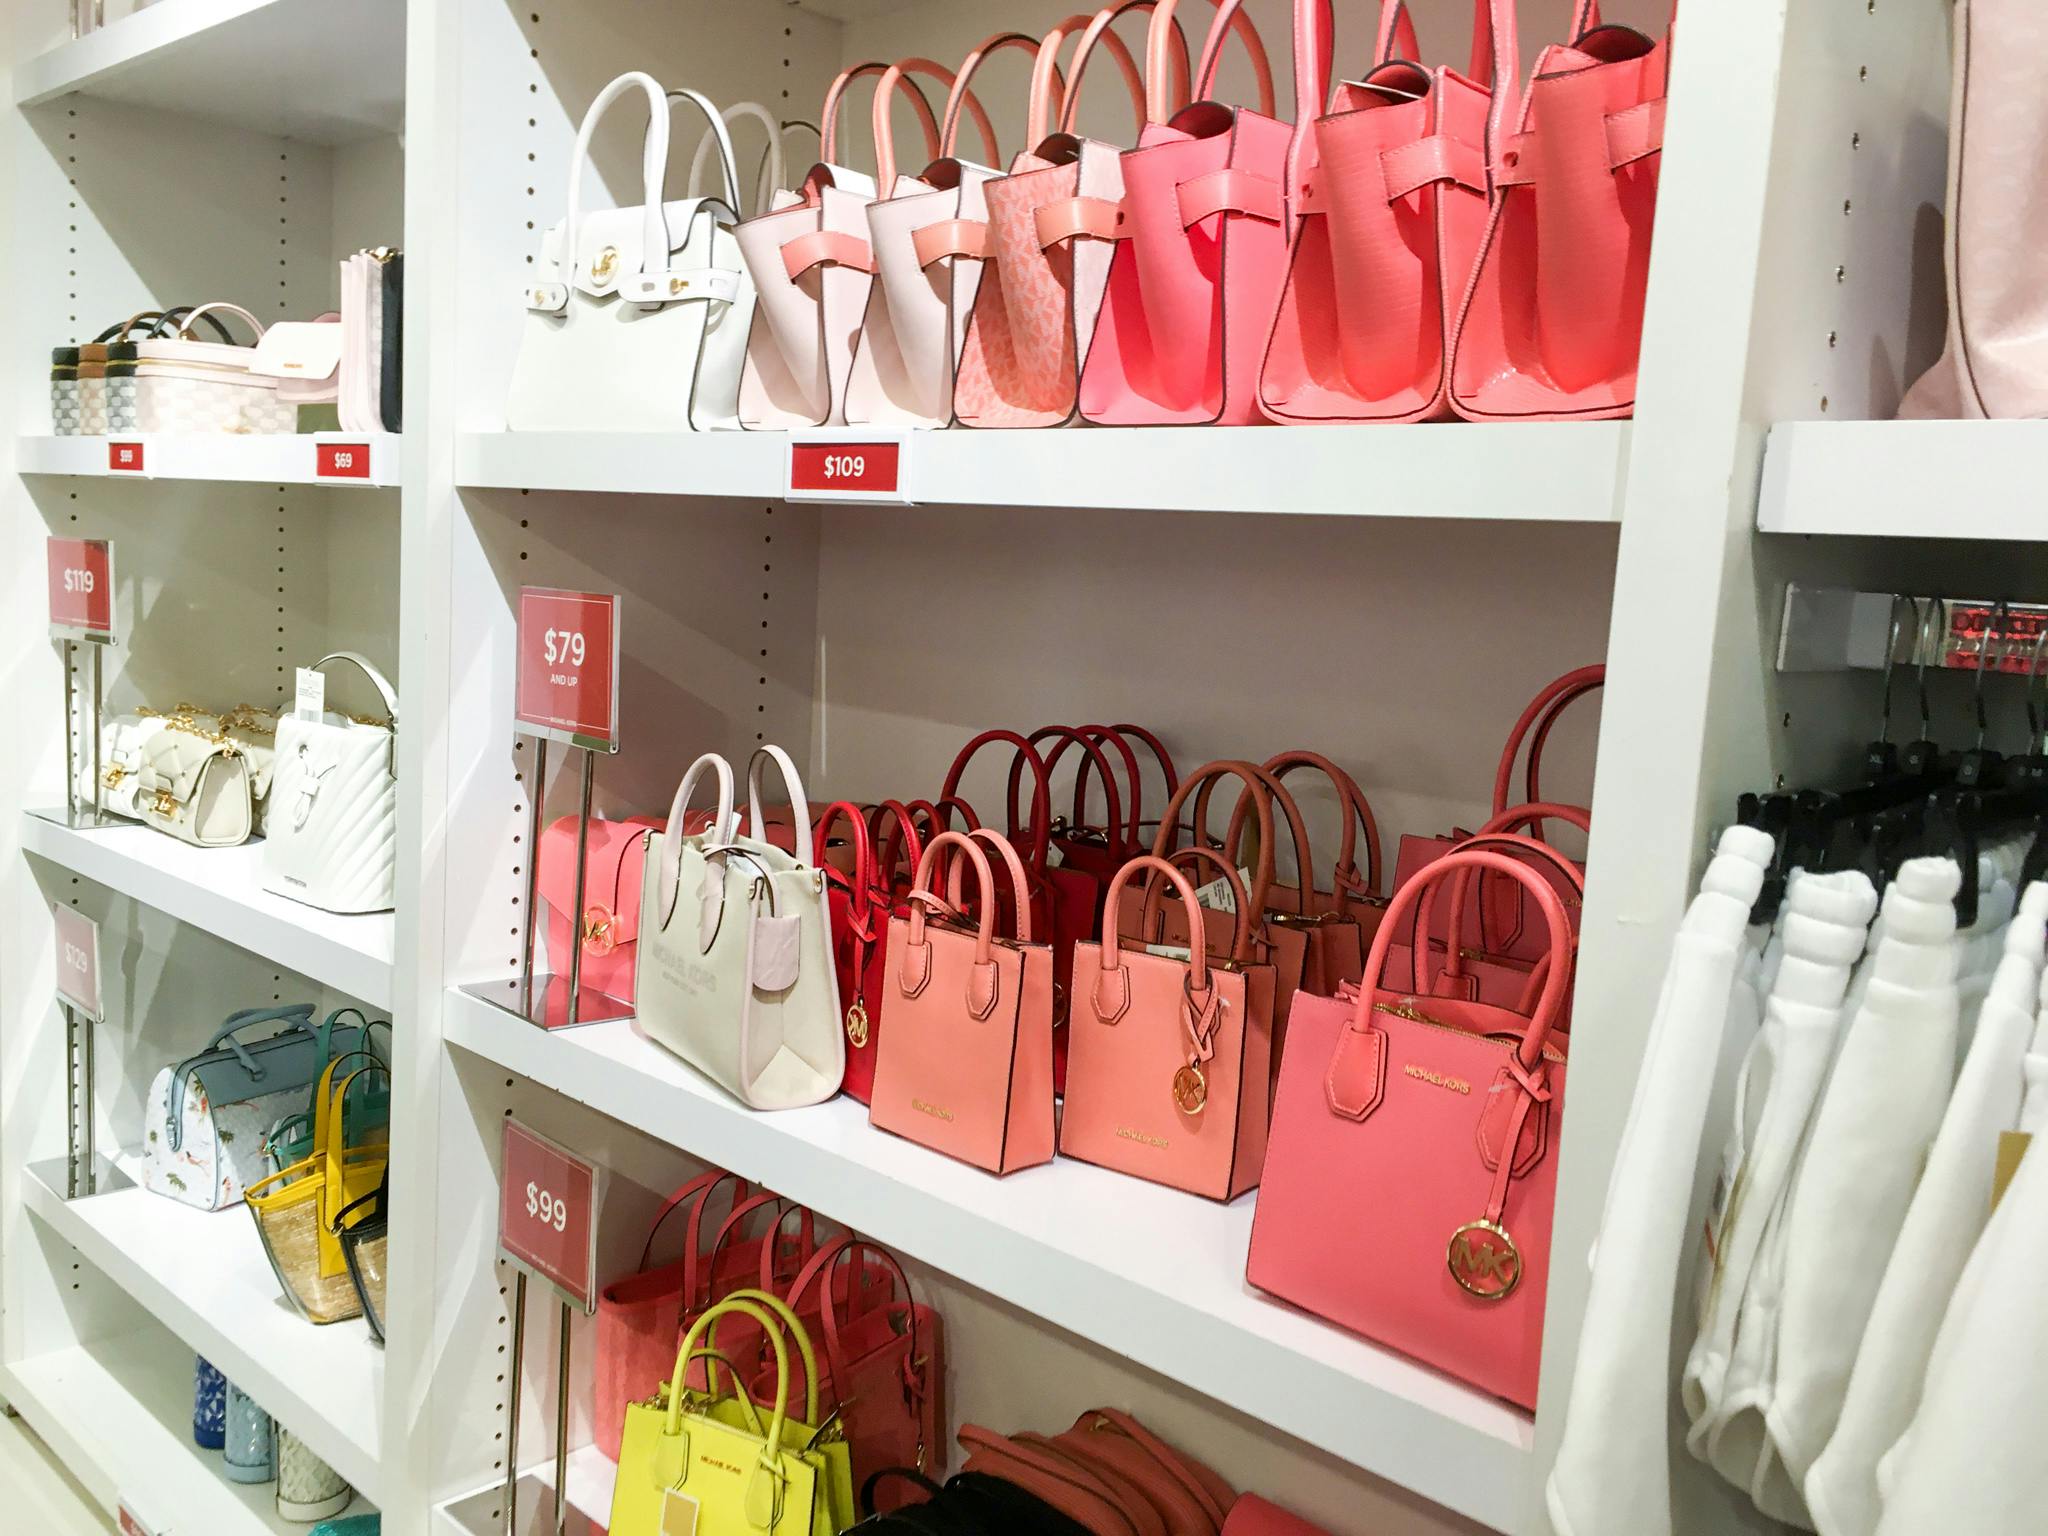 Michael Kors Bags New arrival, outletstore